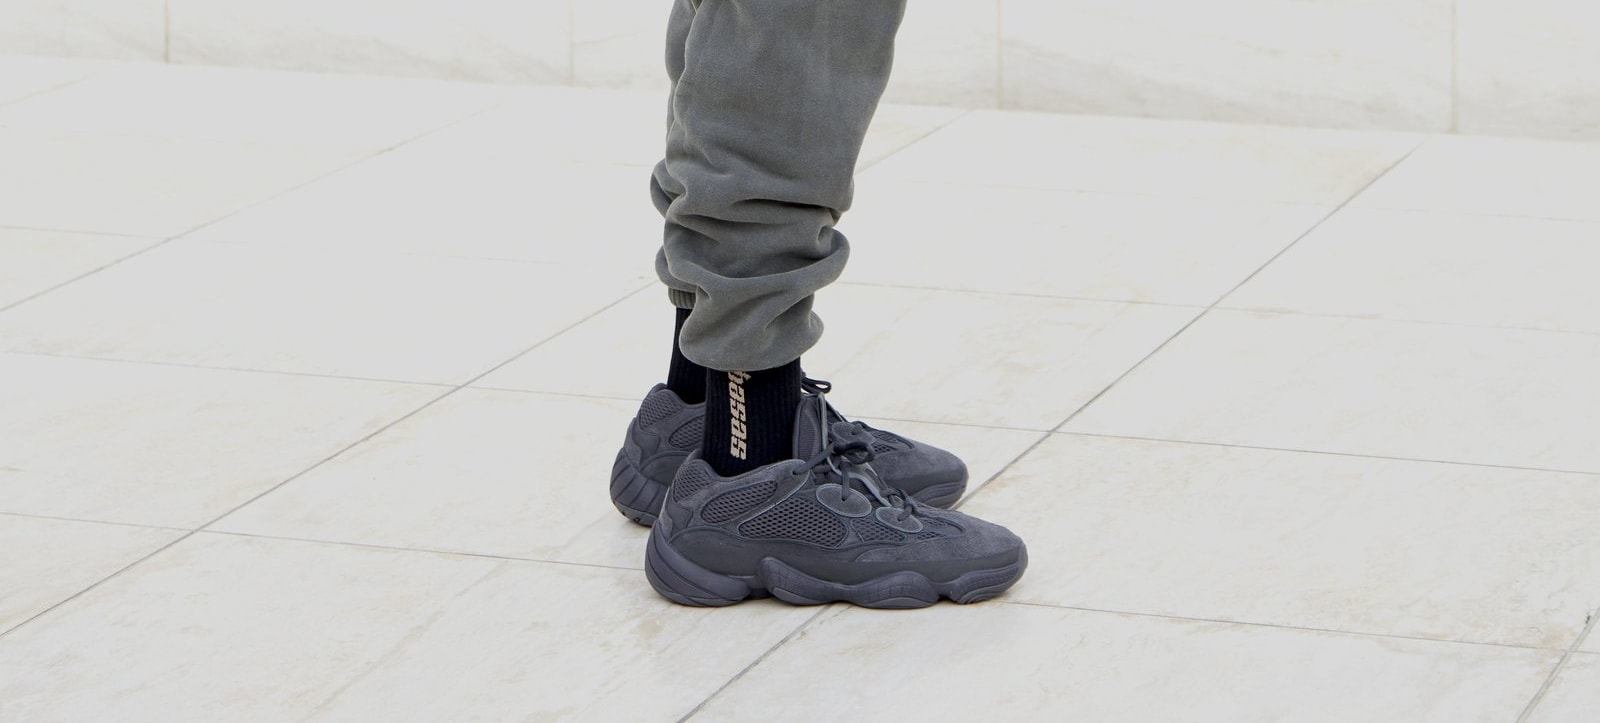 maternal Enig med region Adidas Yeezy 500 'Utility Black' F36640 Release Date | Sole Collector